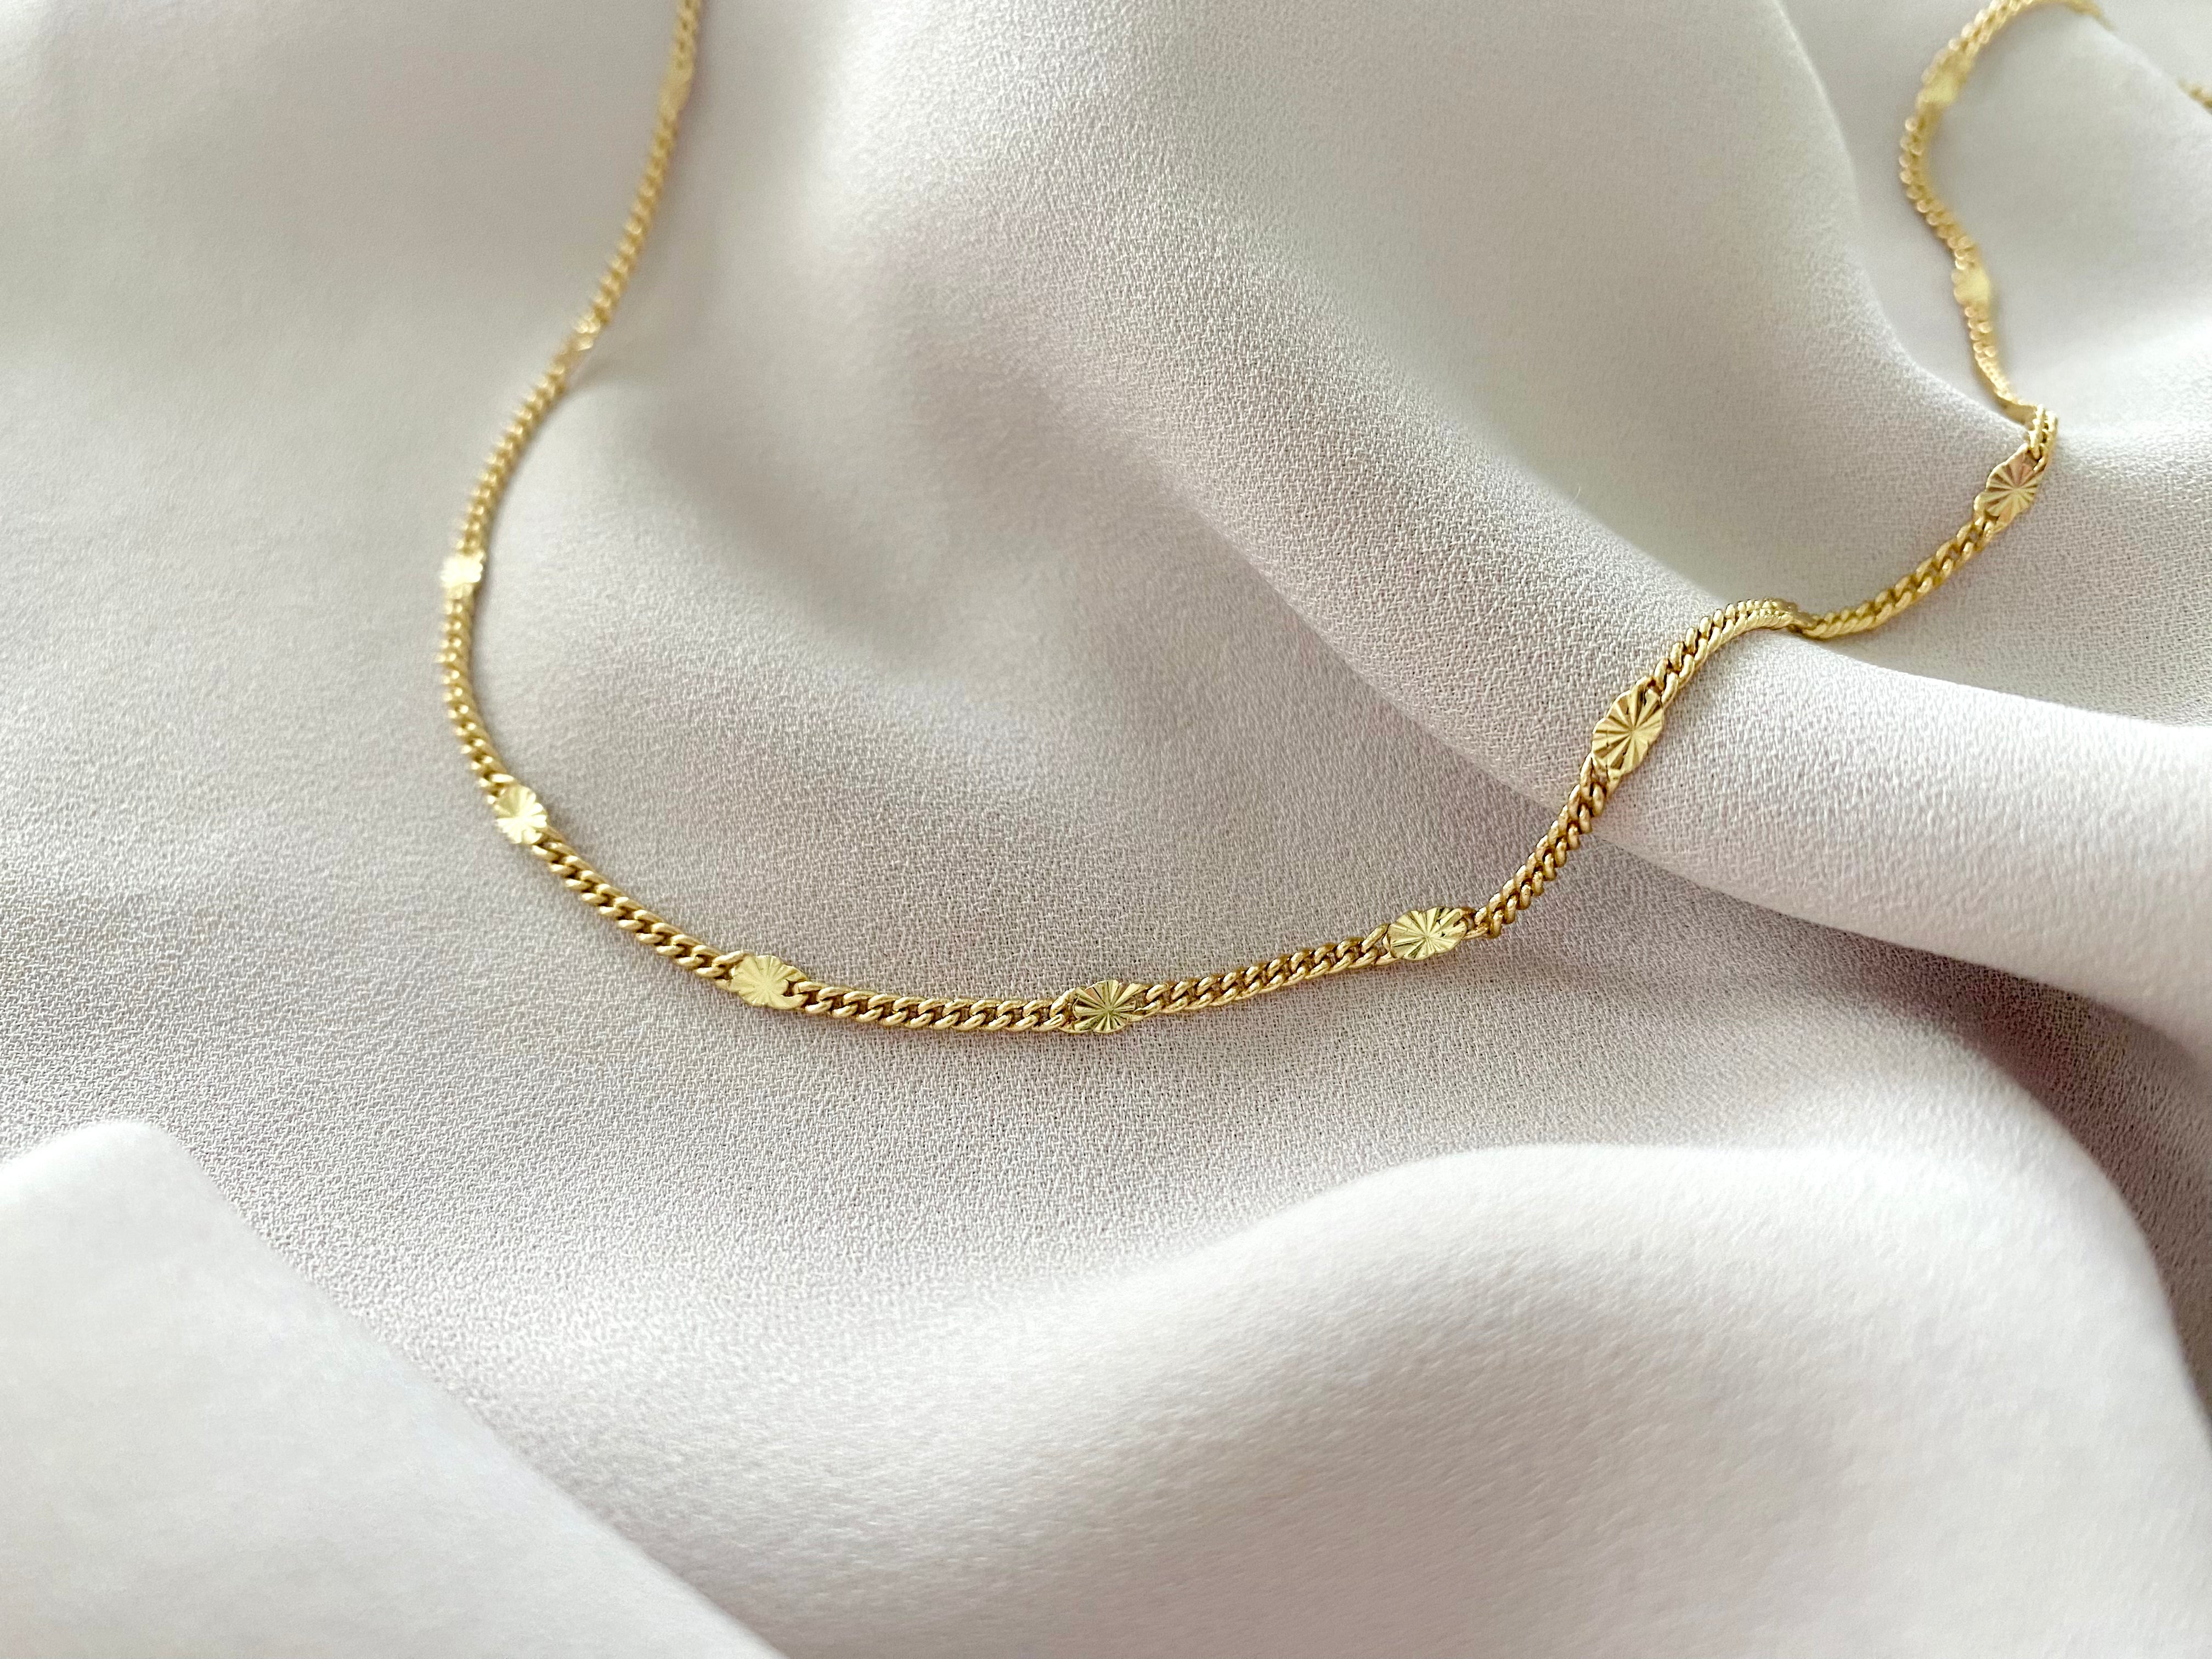 Dainty Gold Filled Celestial Chain Necklace Simple Layering Necklace Curb Chain Everyday Necklaces Christmas Gift Star Chain Necklace